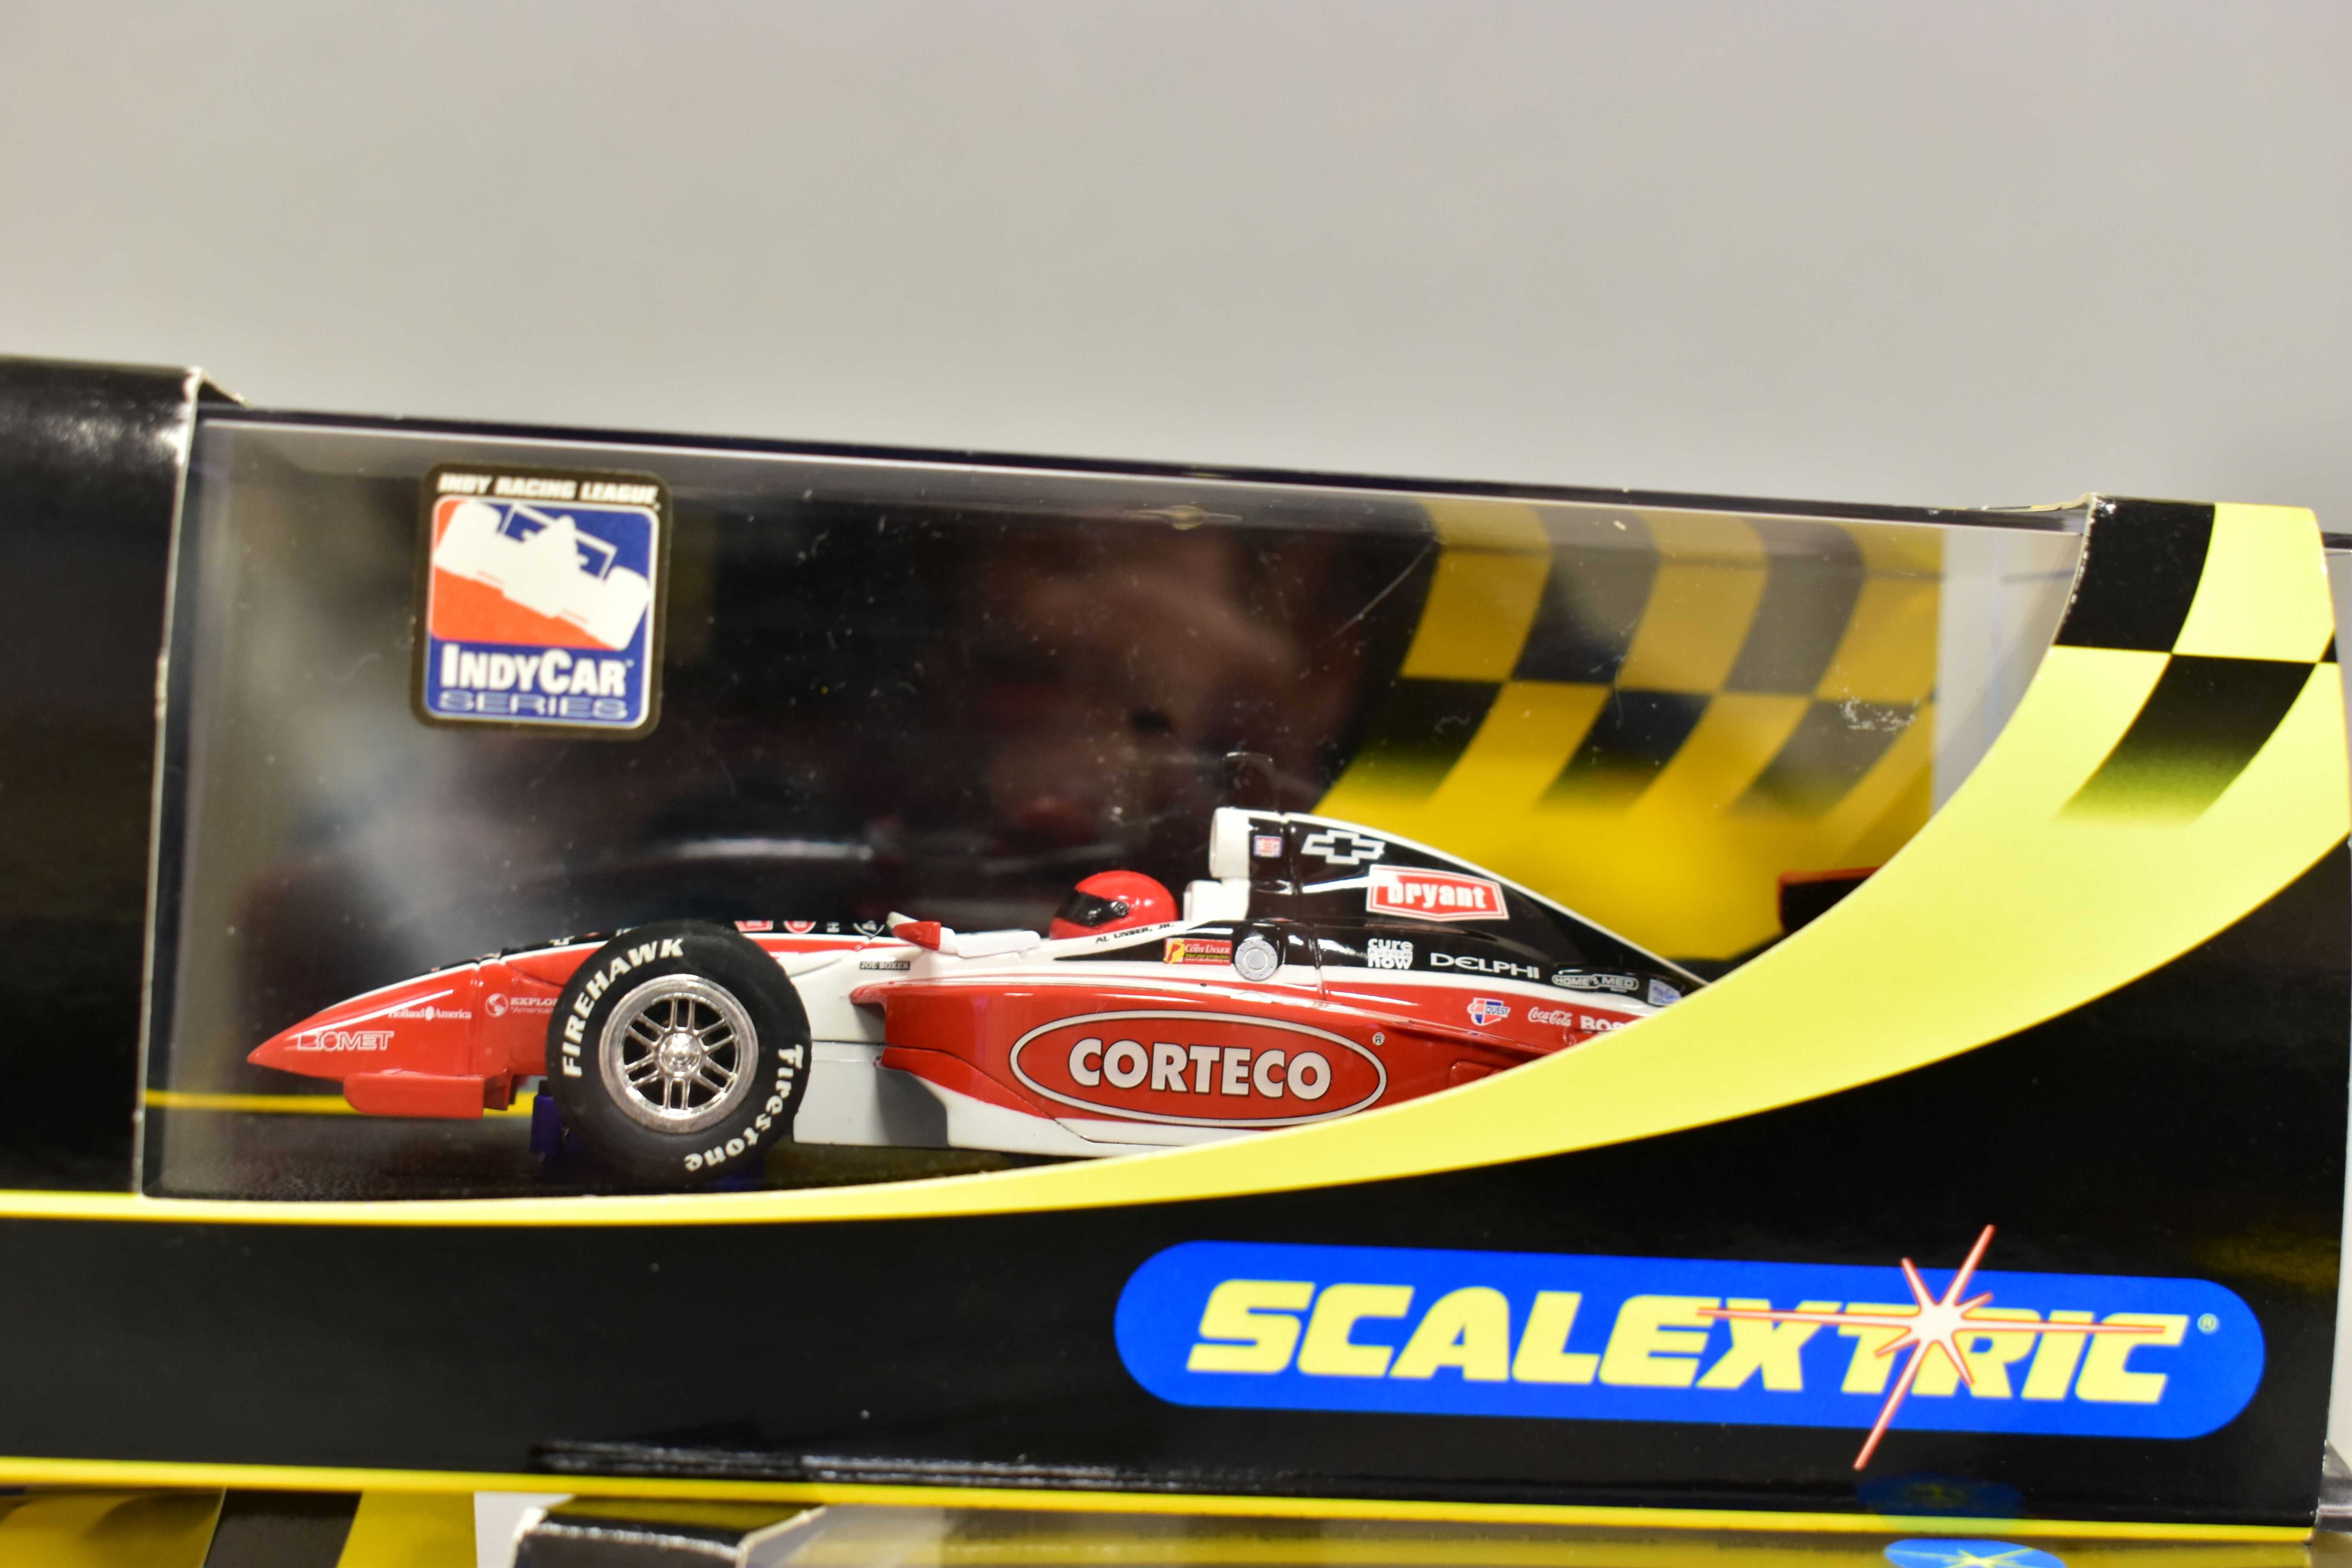 FIVE BOXED SCALEXTRIC DALLARA INDY RACING CARS, assorted liveries, Red Bull No.52 (C2394), - Image 5 of 6